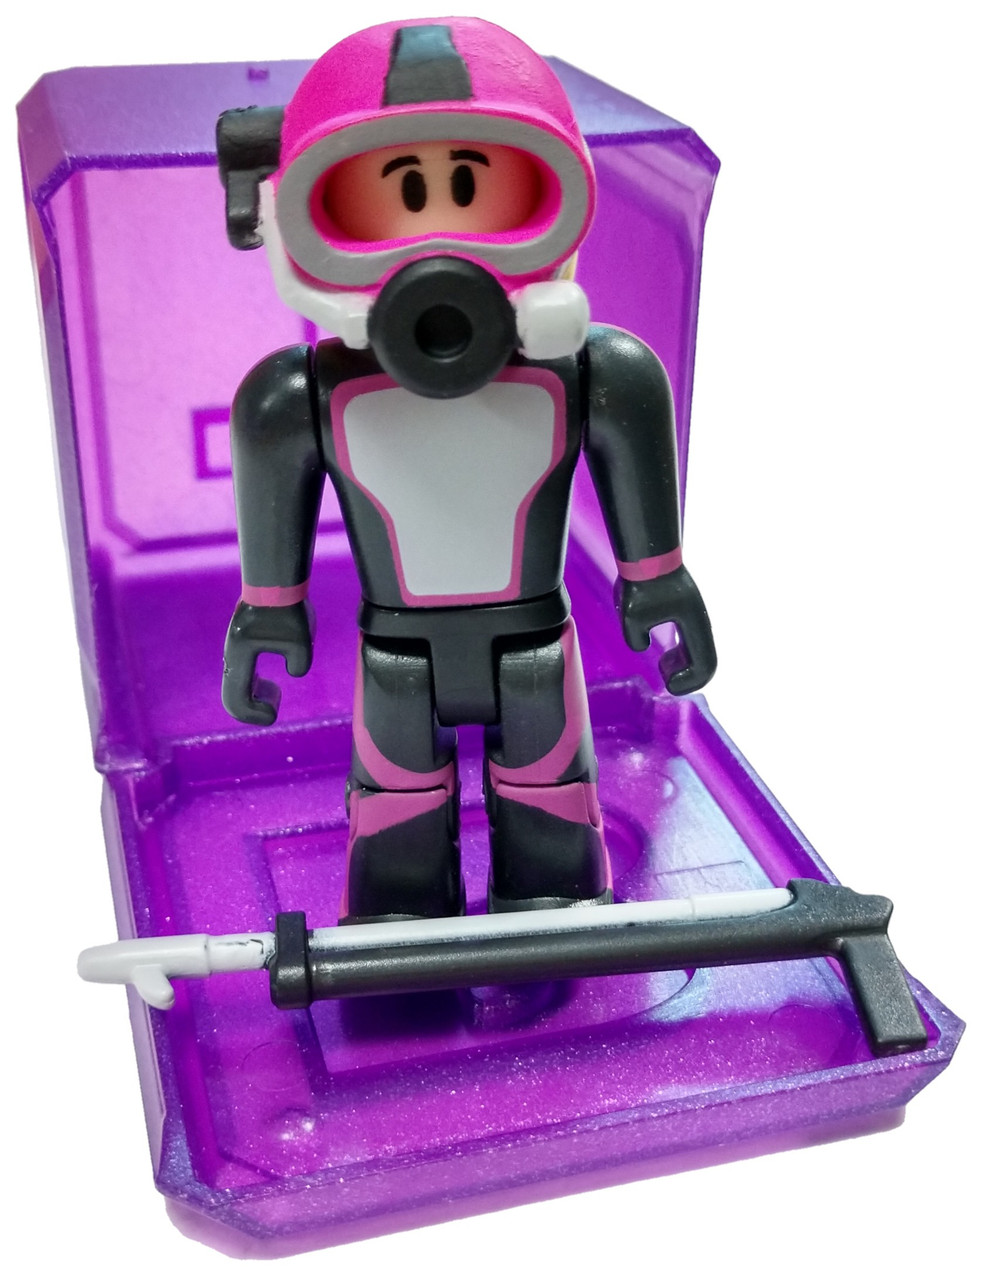 Roblox Celebrity Collection Series 3 Fuzzywooos Shark Diver 3 Mini Figure With Cube And Online Code Loose Jazwares Toywiz - roblox baby shark video code